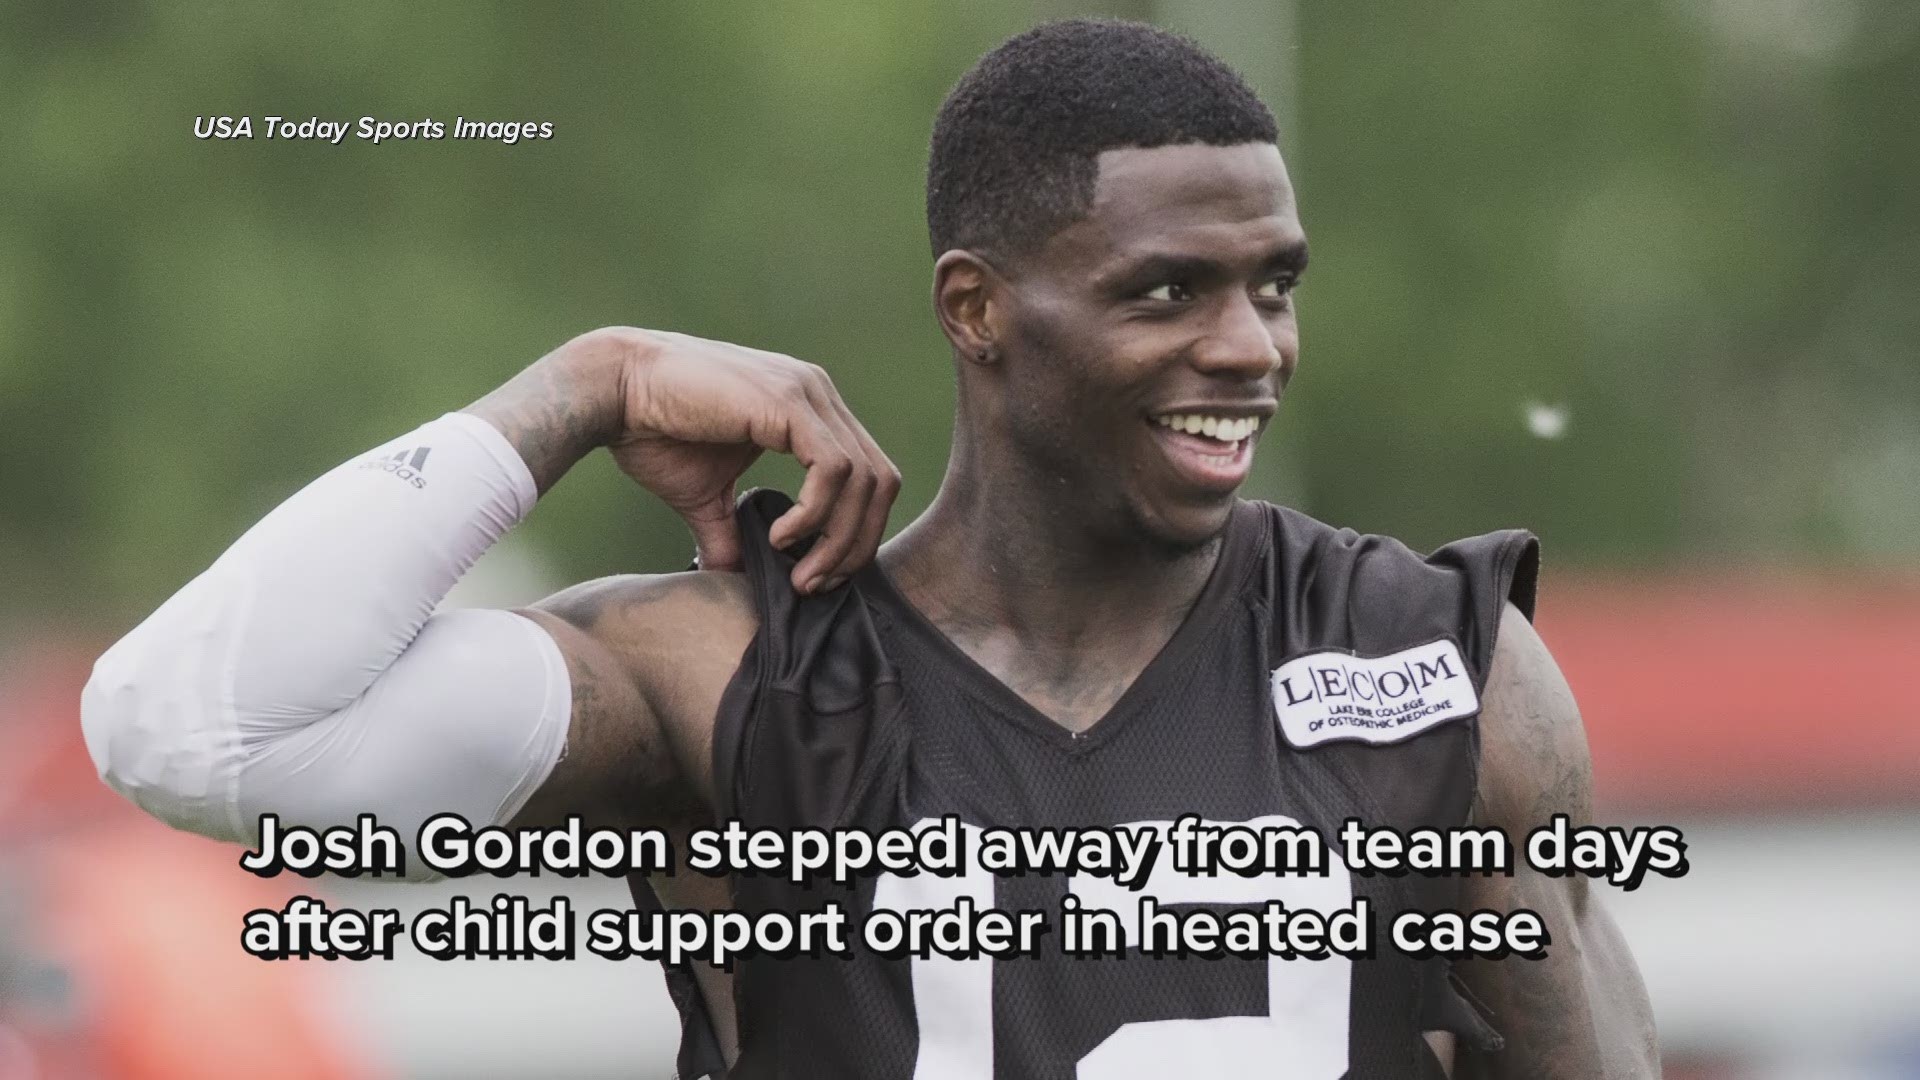 Cleveland Browns' Josh Gordon stepped away from team days after child support order in heated case